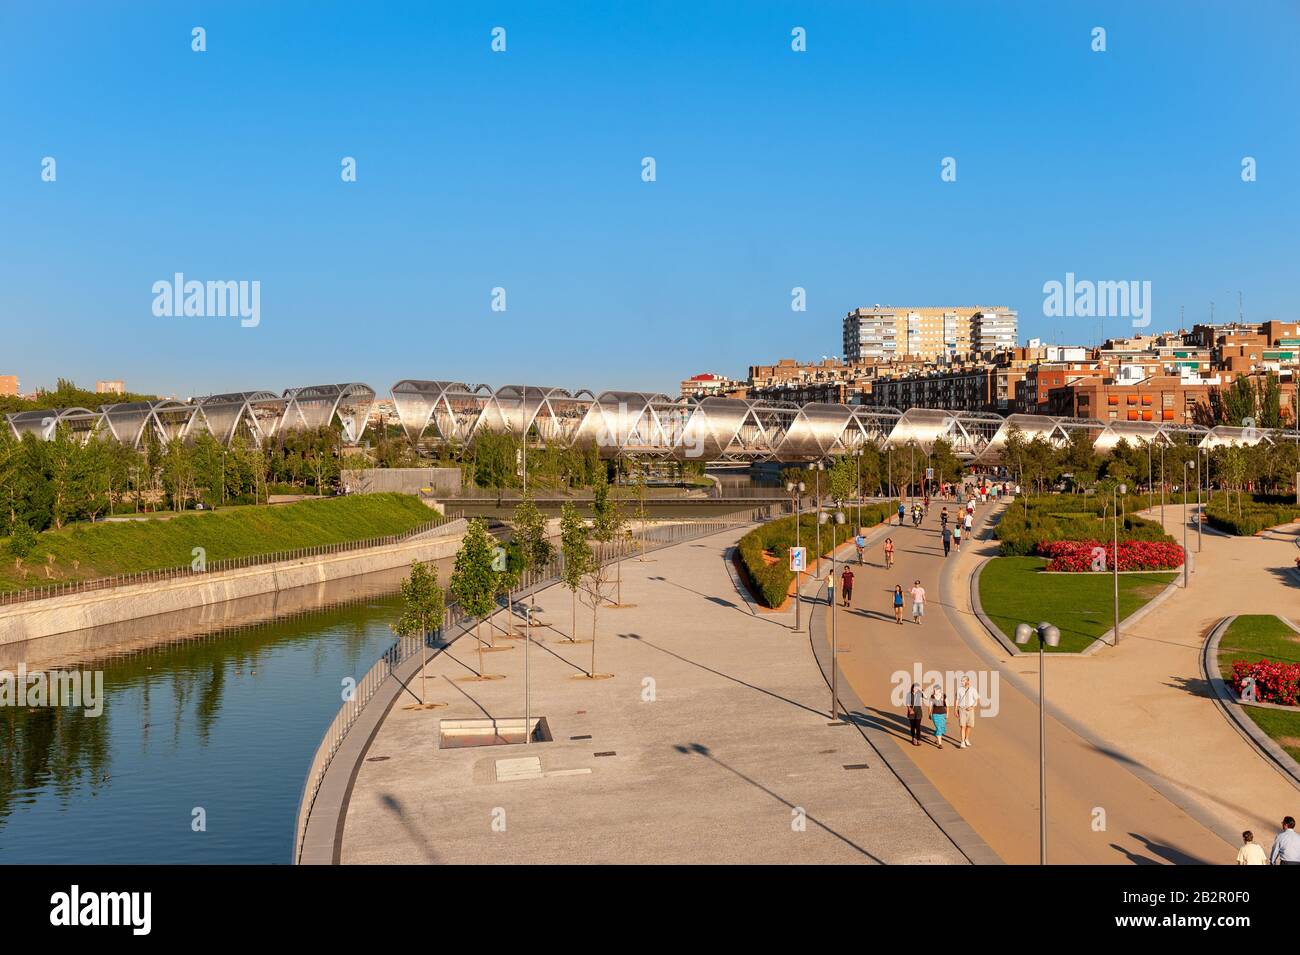 Madrid Rio park or Parque Madrid Rio on the banks of the Manzanares river, Madrid, Spain Stock Photo